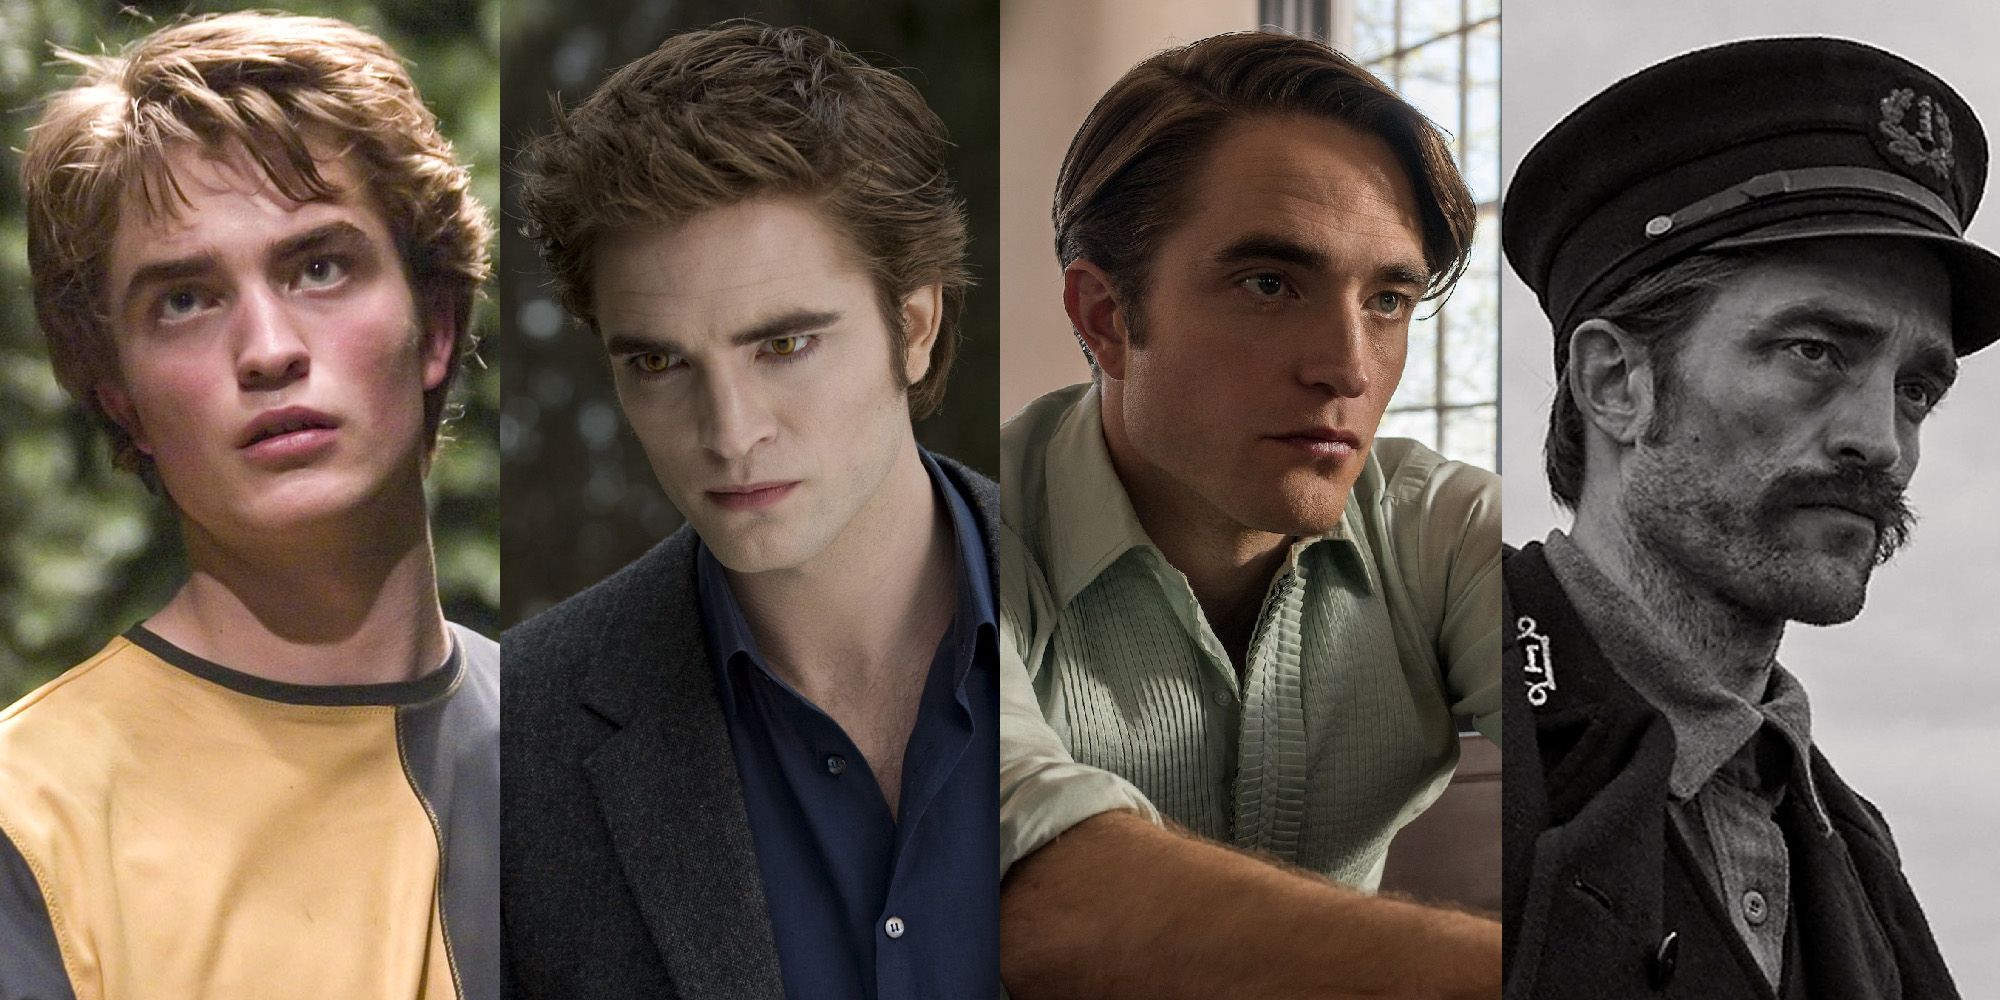 Robert Pattinson: A Journey from Twilight Heartthrob to Acclaimed Actor | BULB